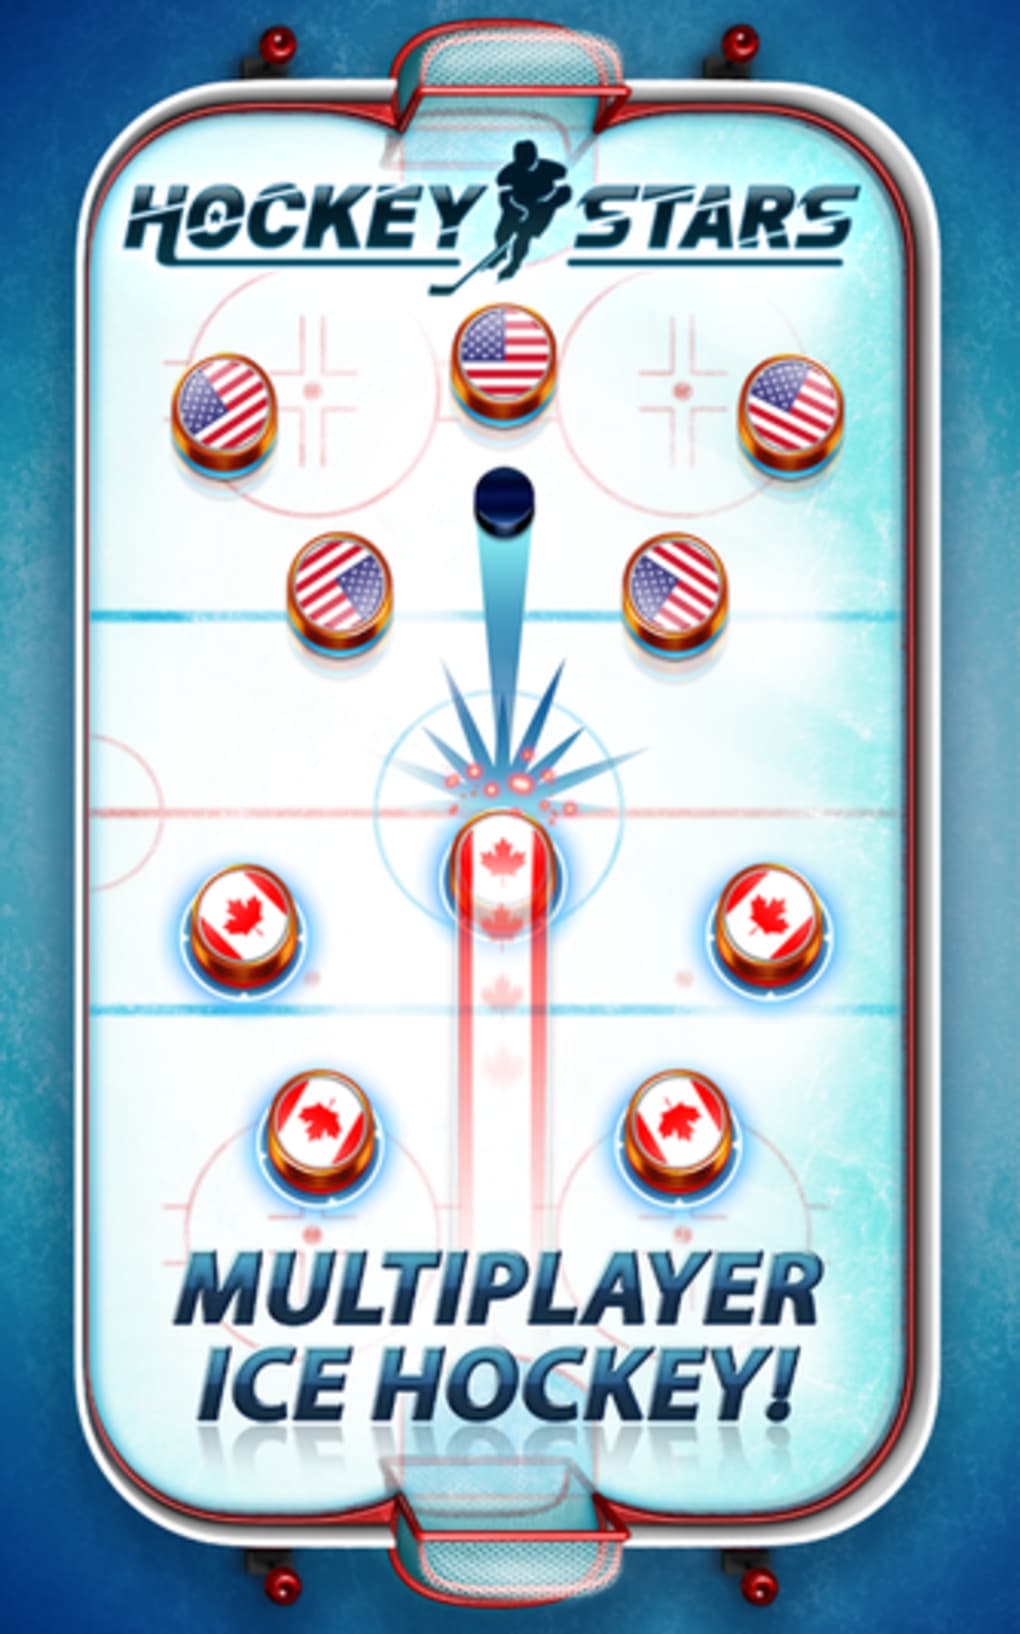 HOCKEY STARS - Play Online for Free!